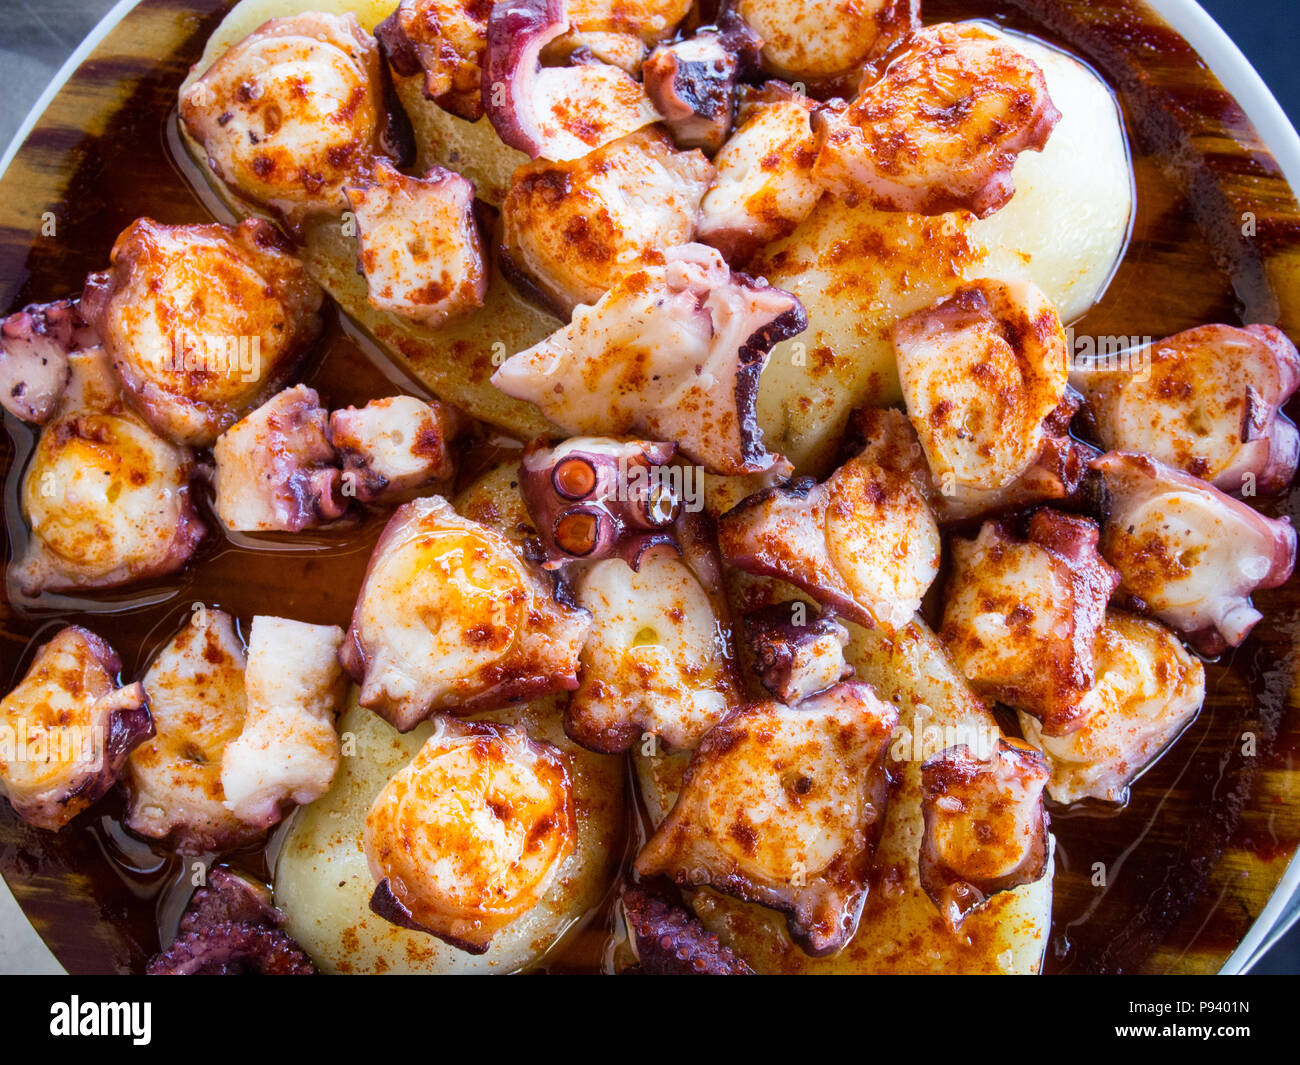 Octopus and potatoes cooked with paprika and olive oil on wood plate.  Galician food Stock Photo